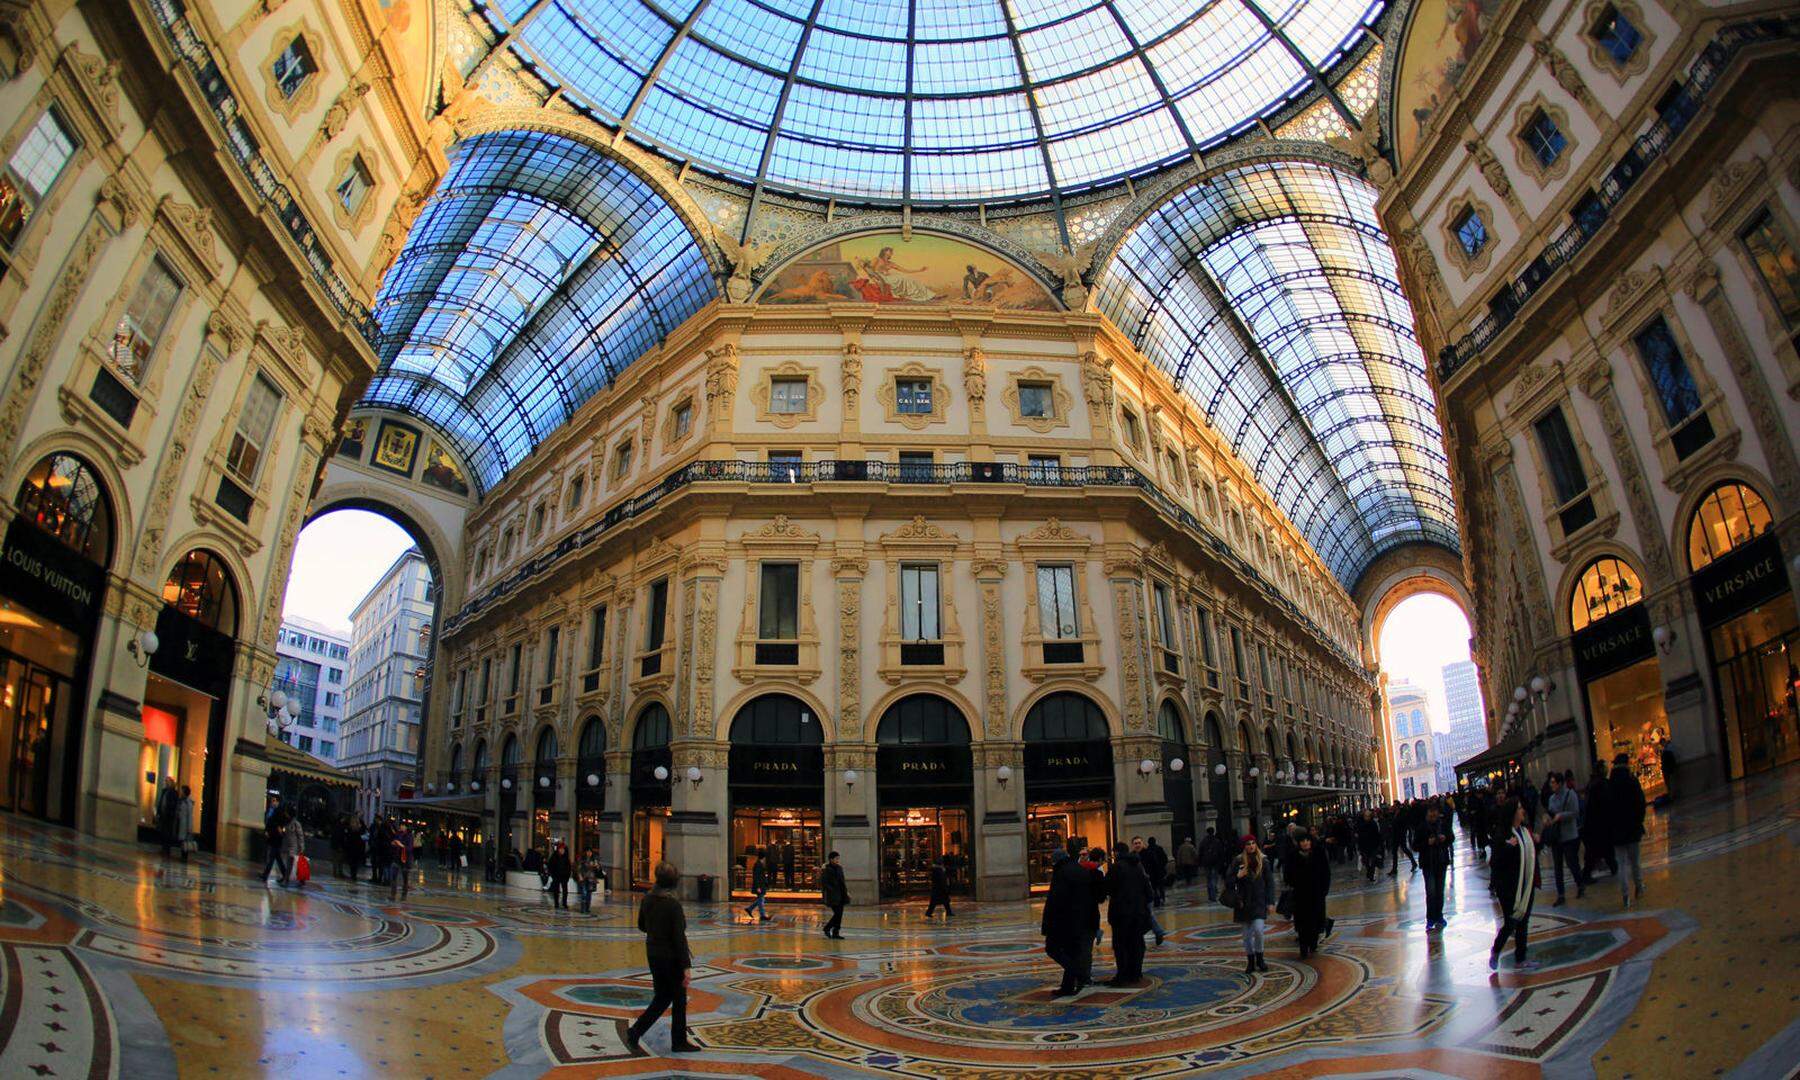 Dior and Fendi to pay record rents for space in Milan's Galleria mall, Italy